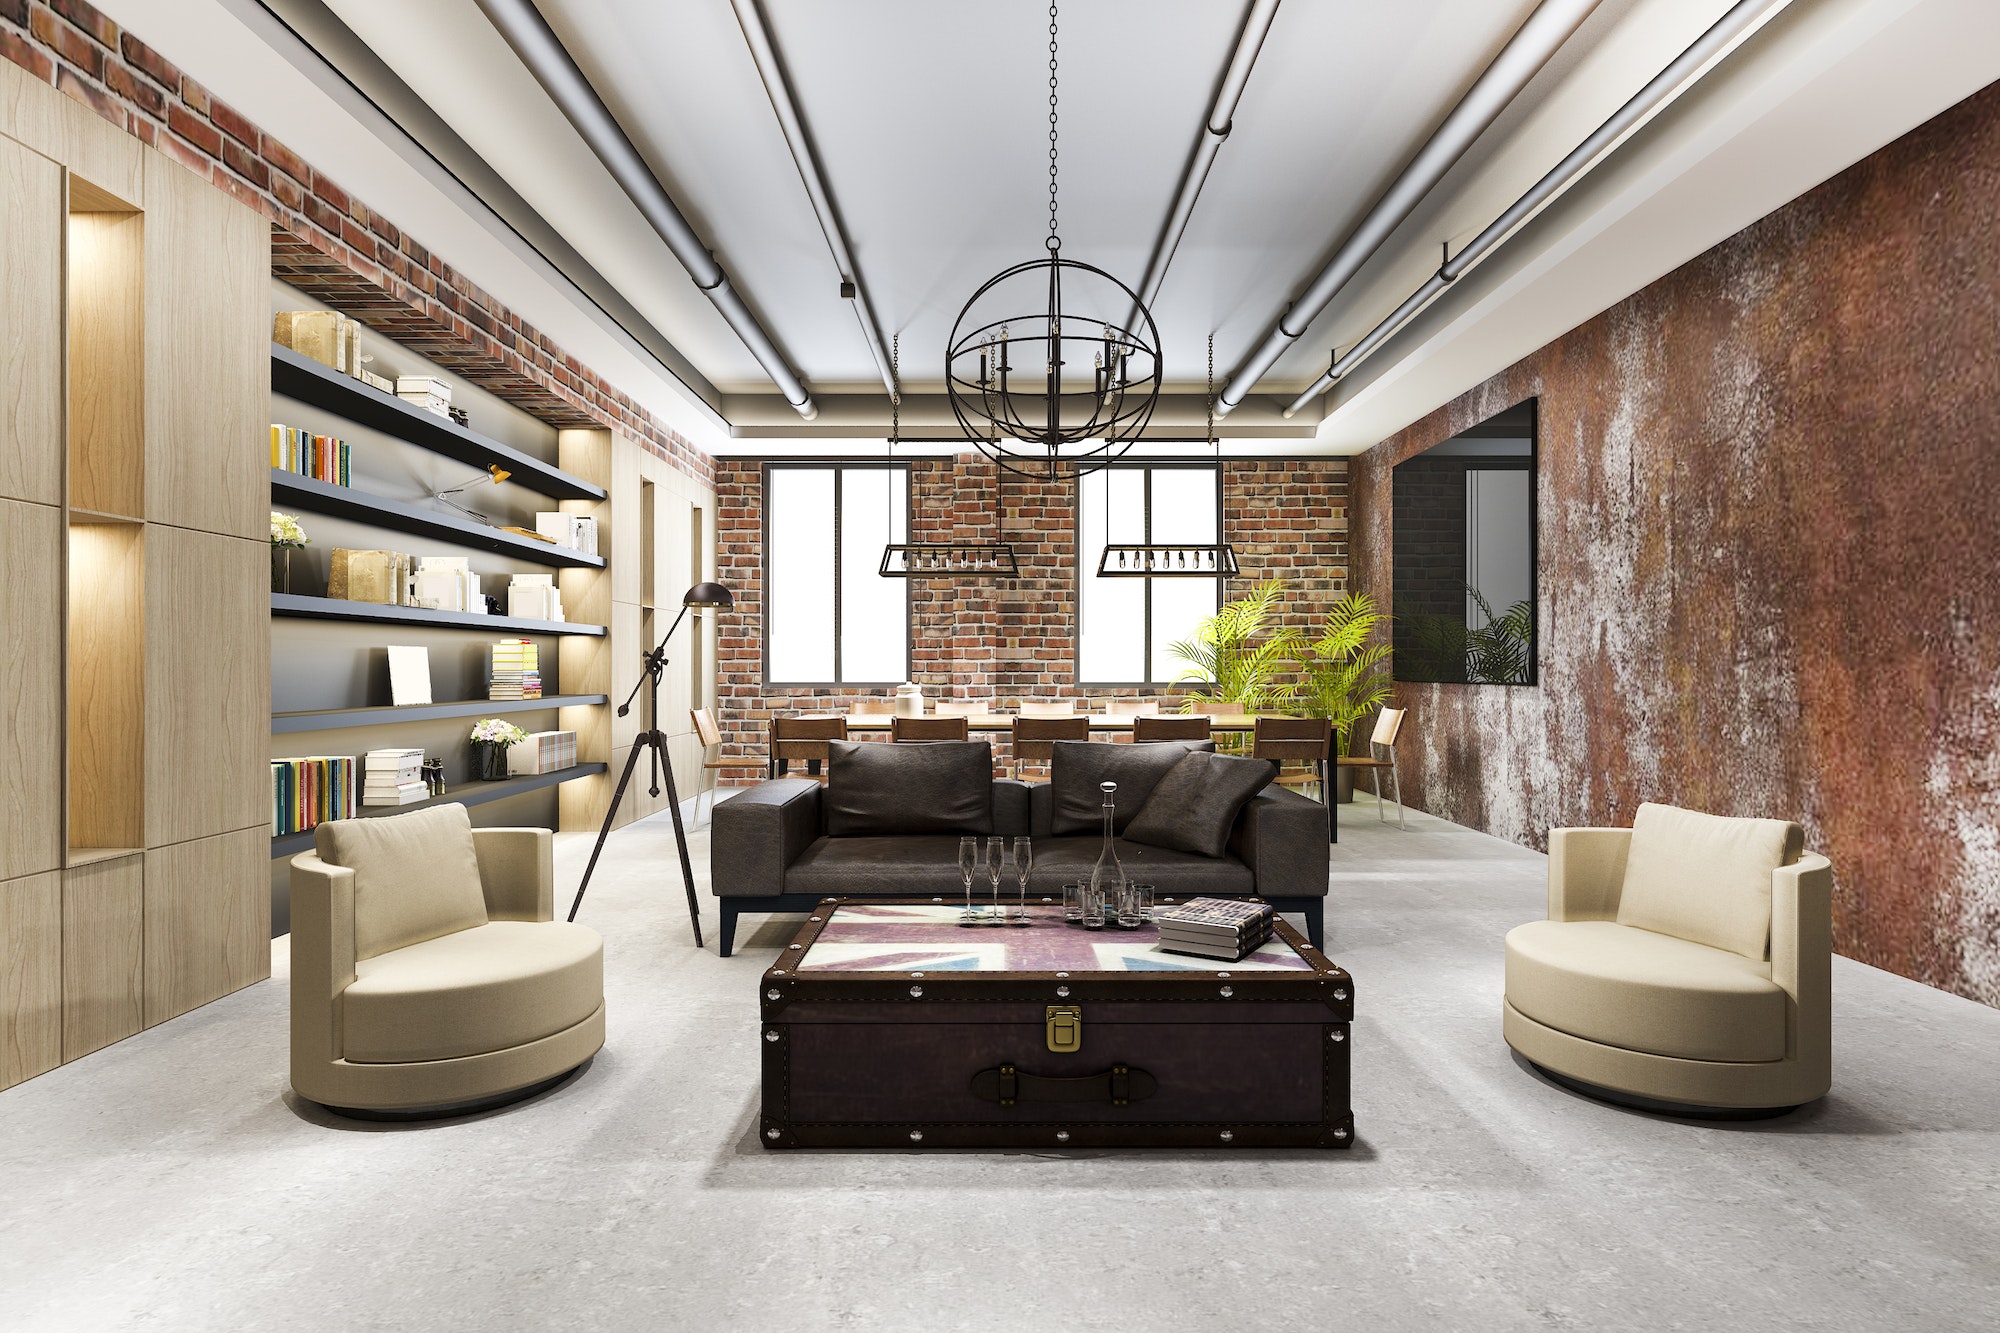 7 Interesting Living Room Ideas In Industrial Style Decor